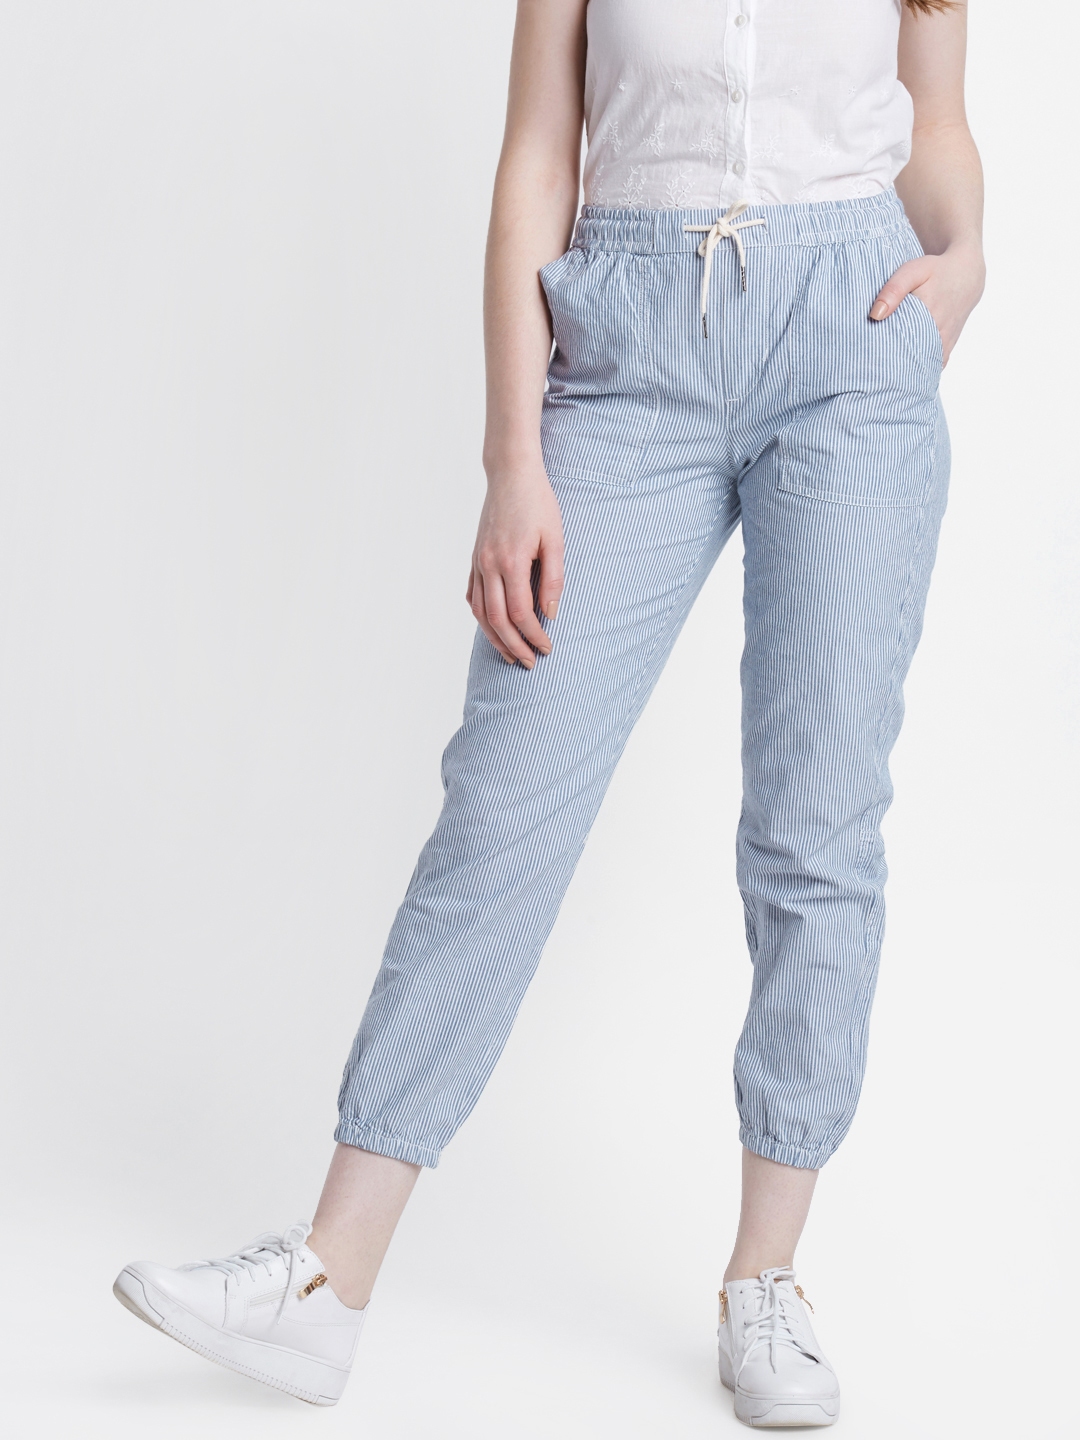 Honey Rust Solid AnkleLength Casual Women Comfort Fit Trousers  Selling  Fast at Pantaloonscom